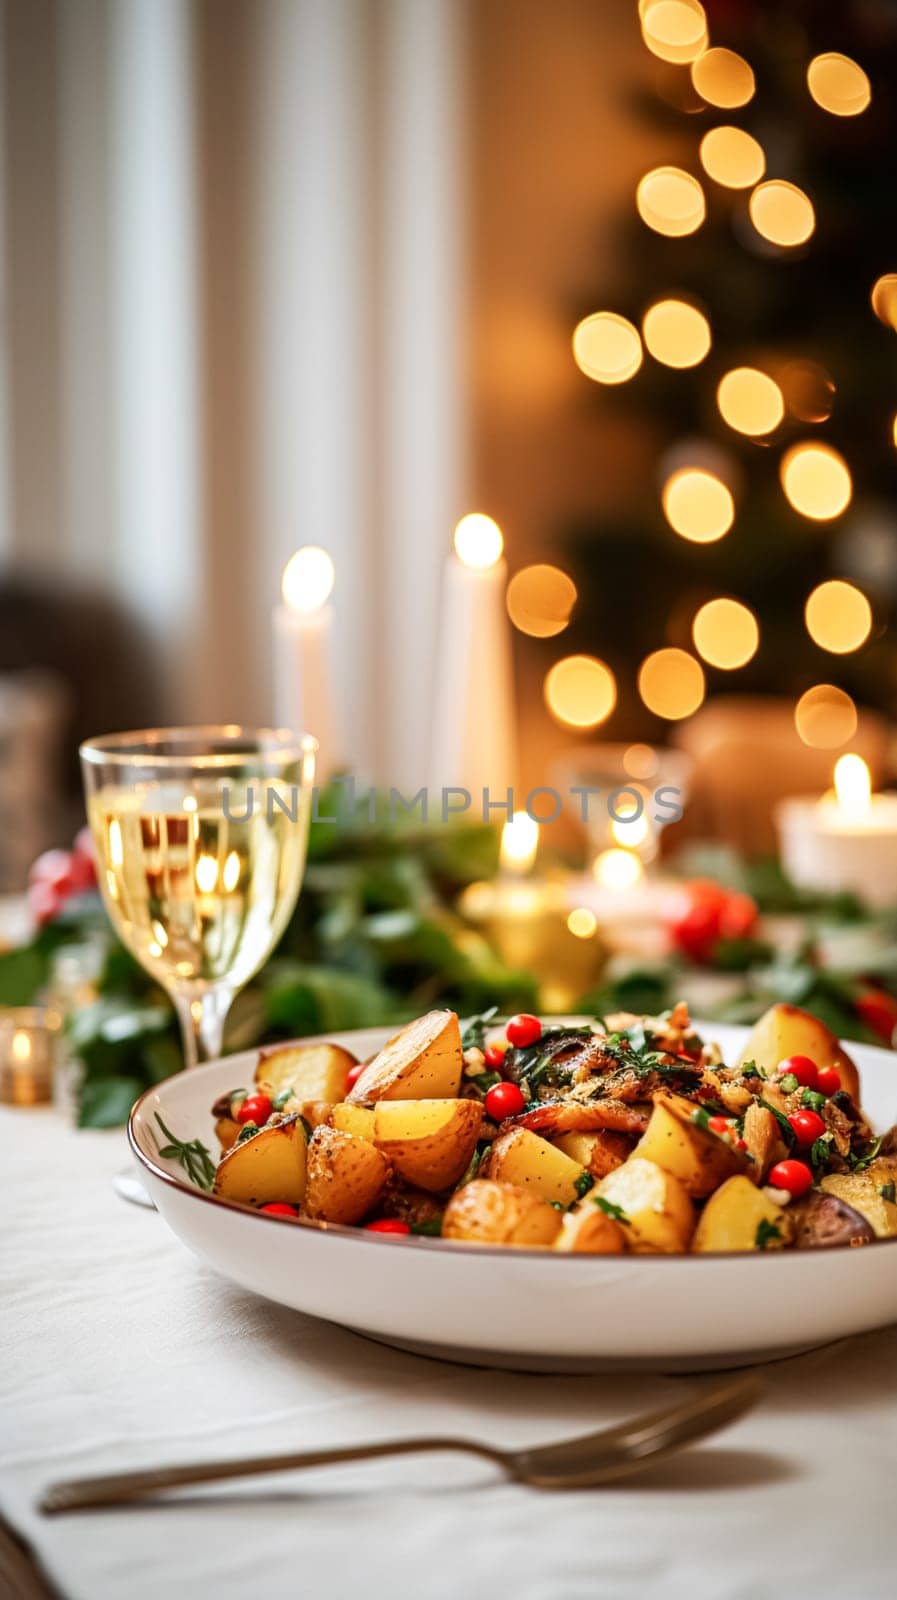 Winter holiday meal for dinner celebration menu, main course festive dish for Christmas, family event, New Year and holidays, English country food recipe by Anneleven